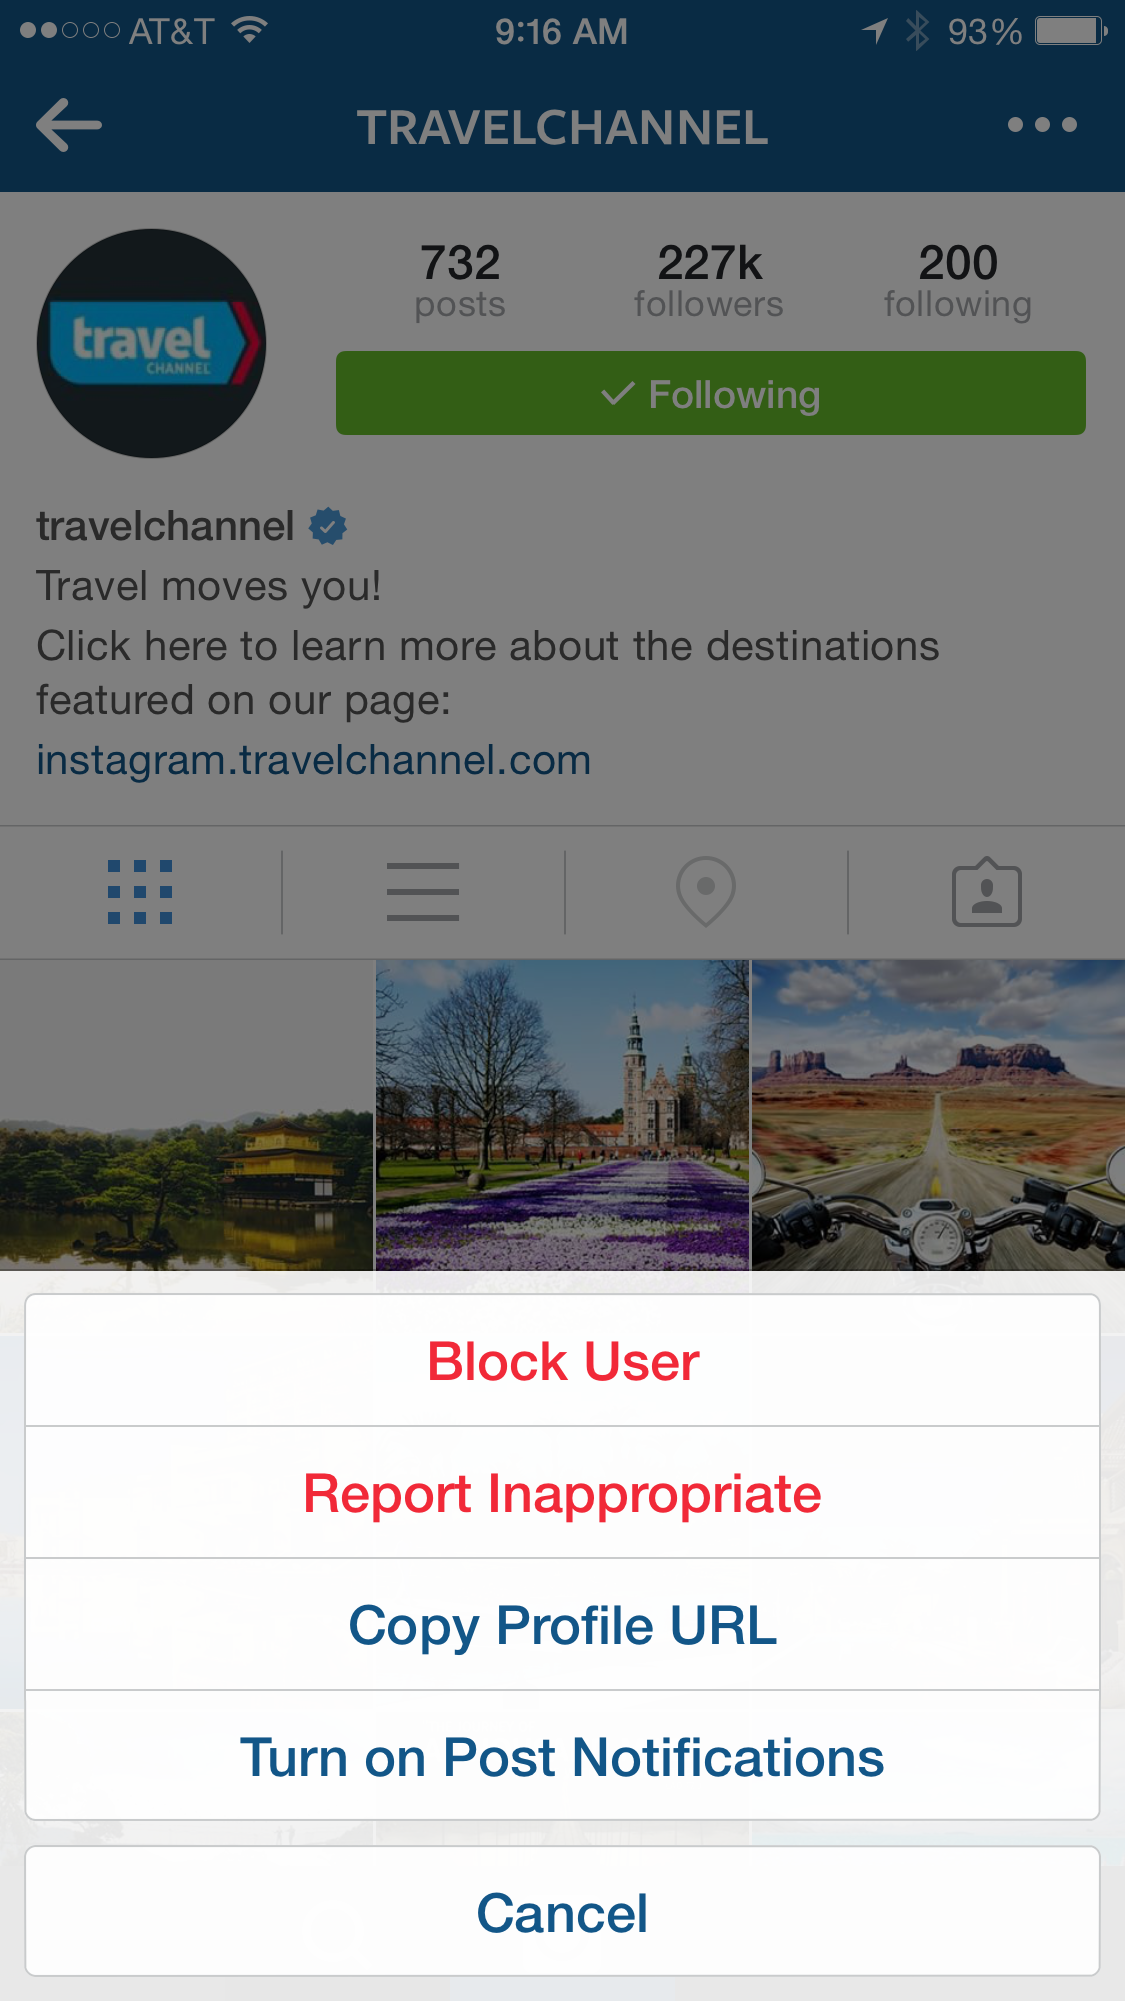 Learn how to get push notifications from Instagram when someone you follow posts a new photo.